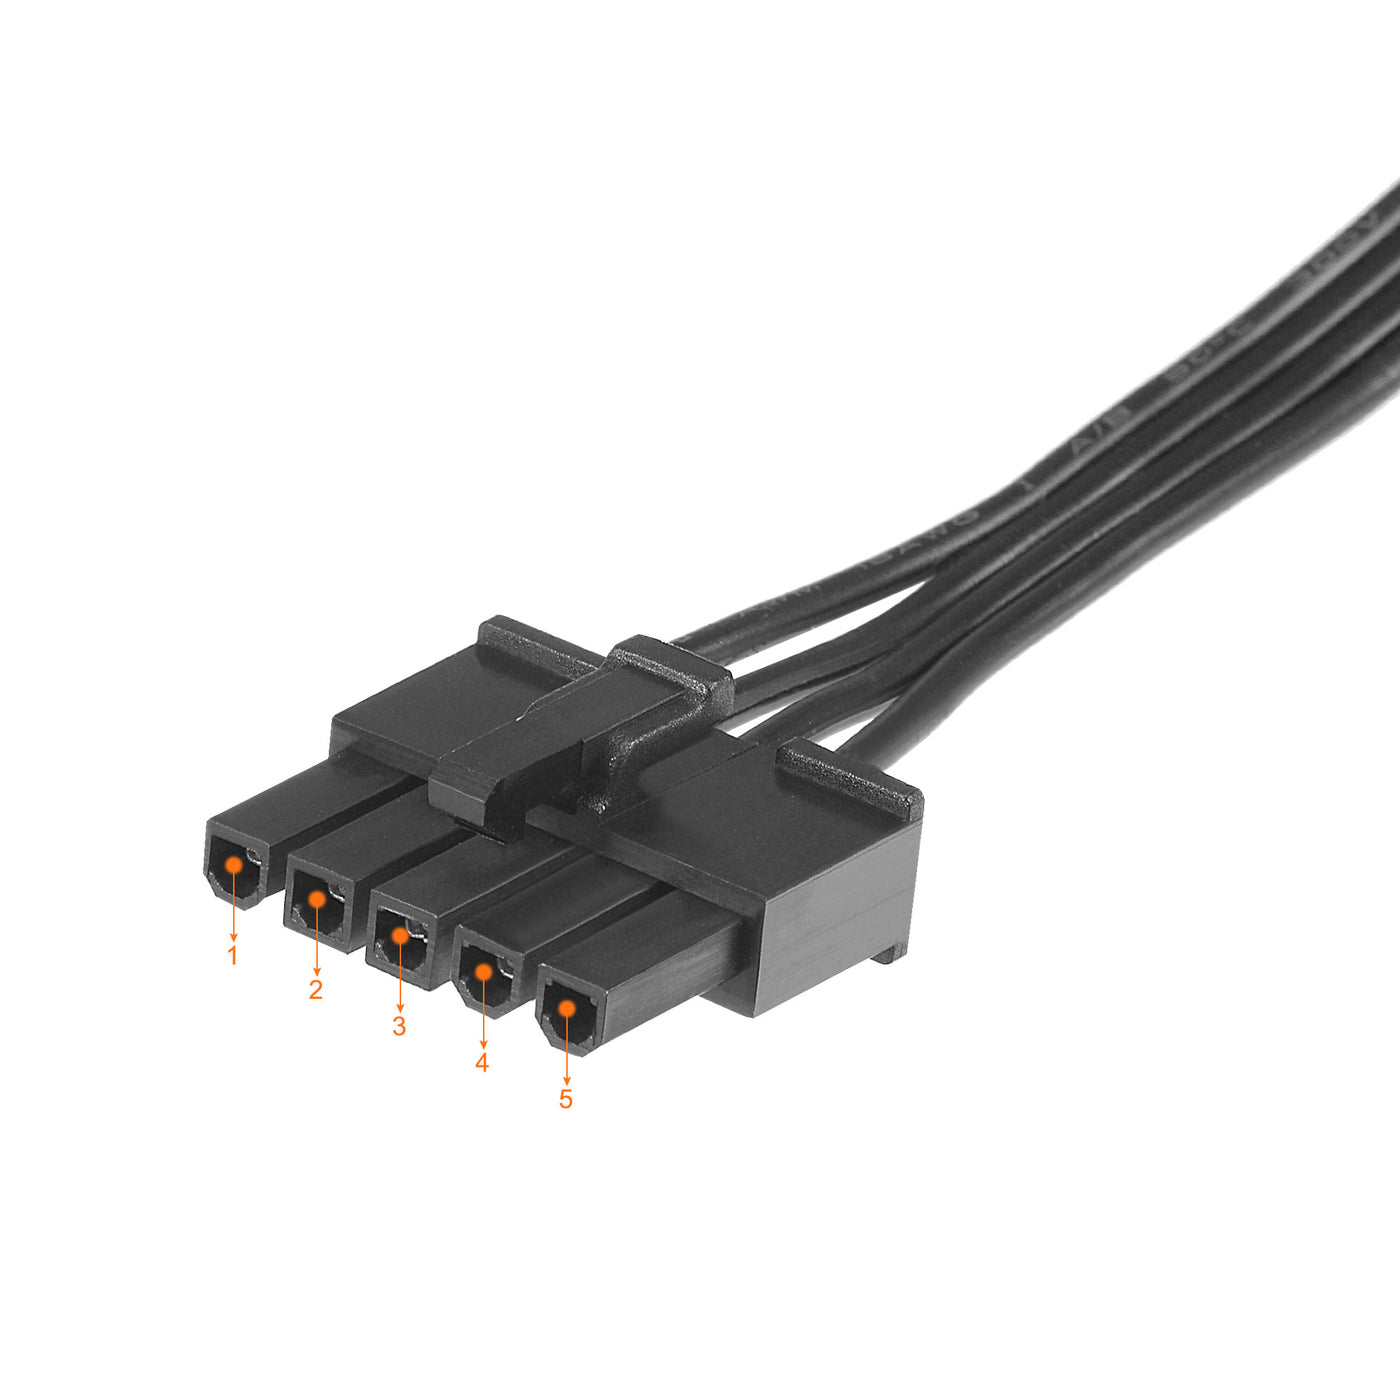 uxcell Uxcell Mainboard Power Cable 5 Grid of PCIe 4 Pin to 3 Splitter 4 Pin IDE Female SATA 18 AWG 67cm